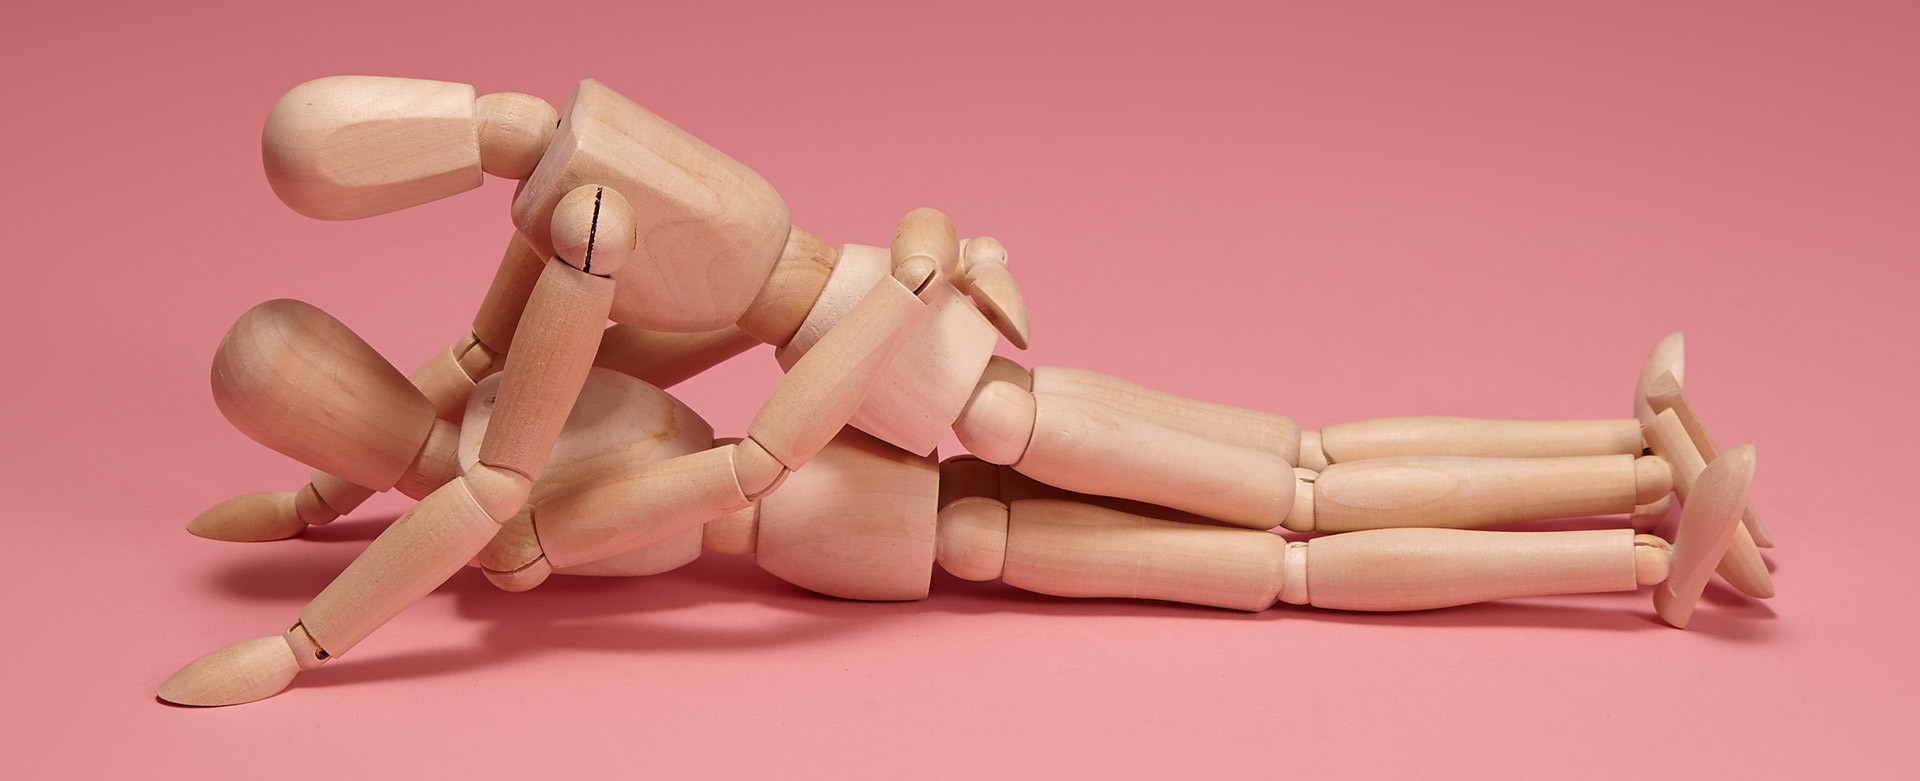 Wooden dolls in missionary position